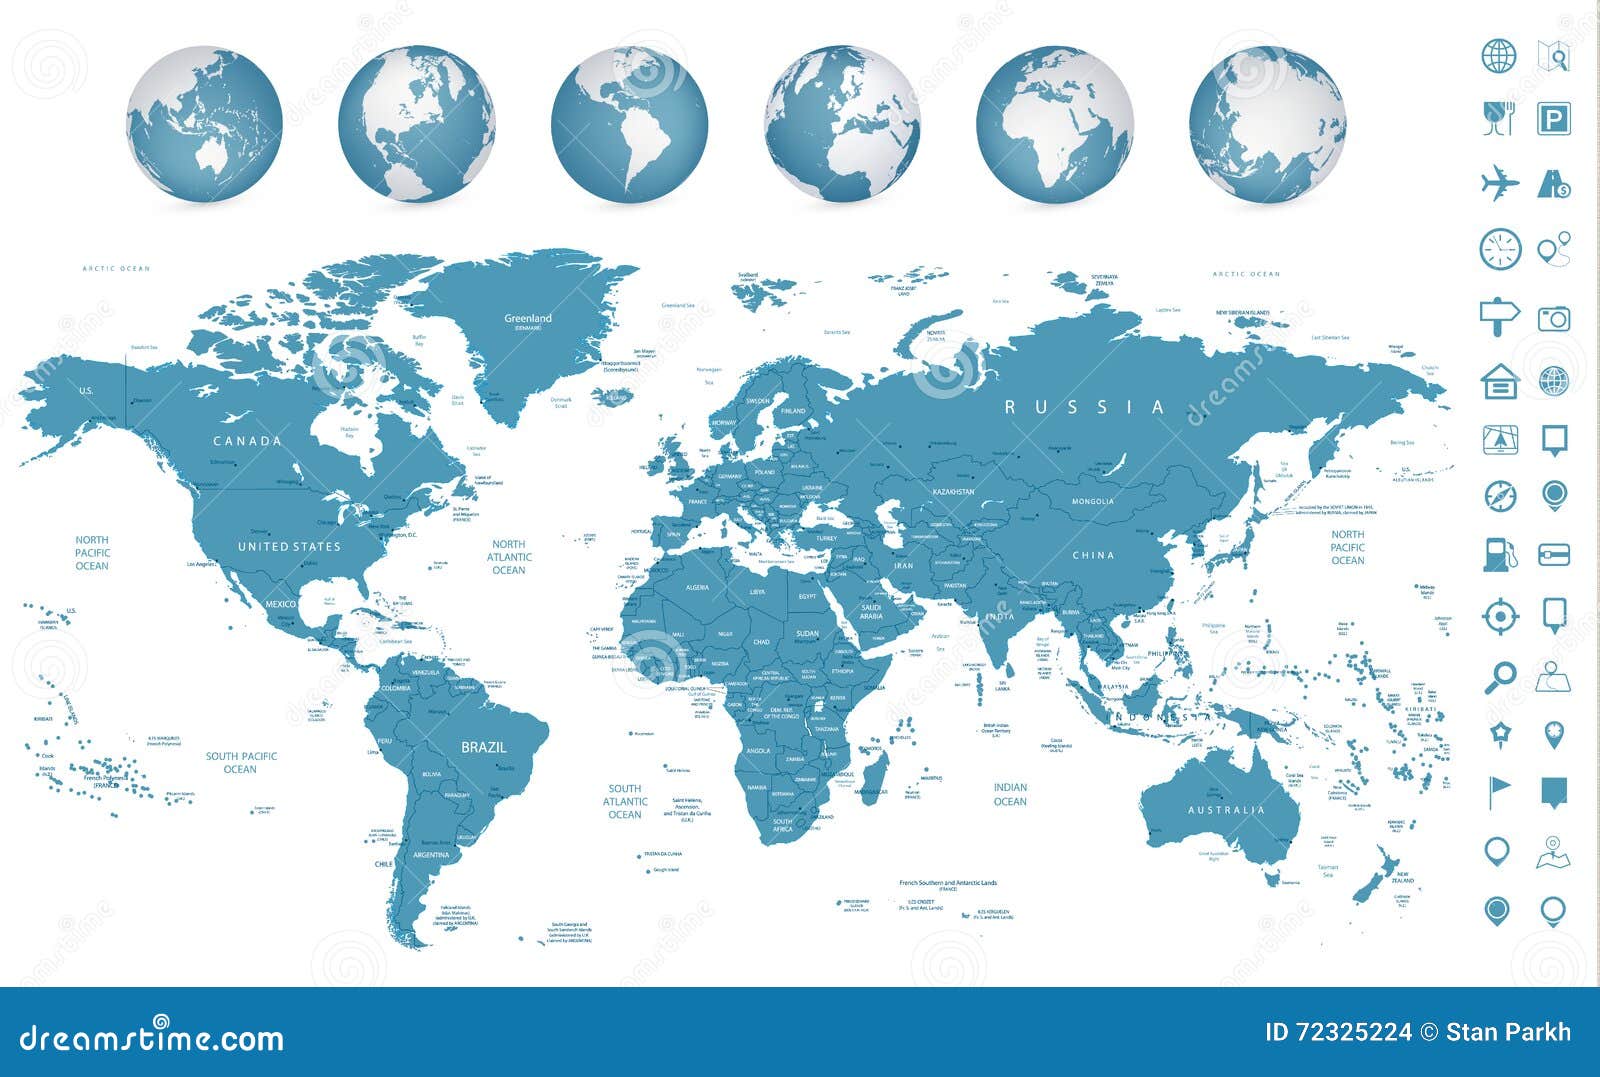 highly detailed world map and navigation icons